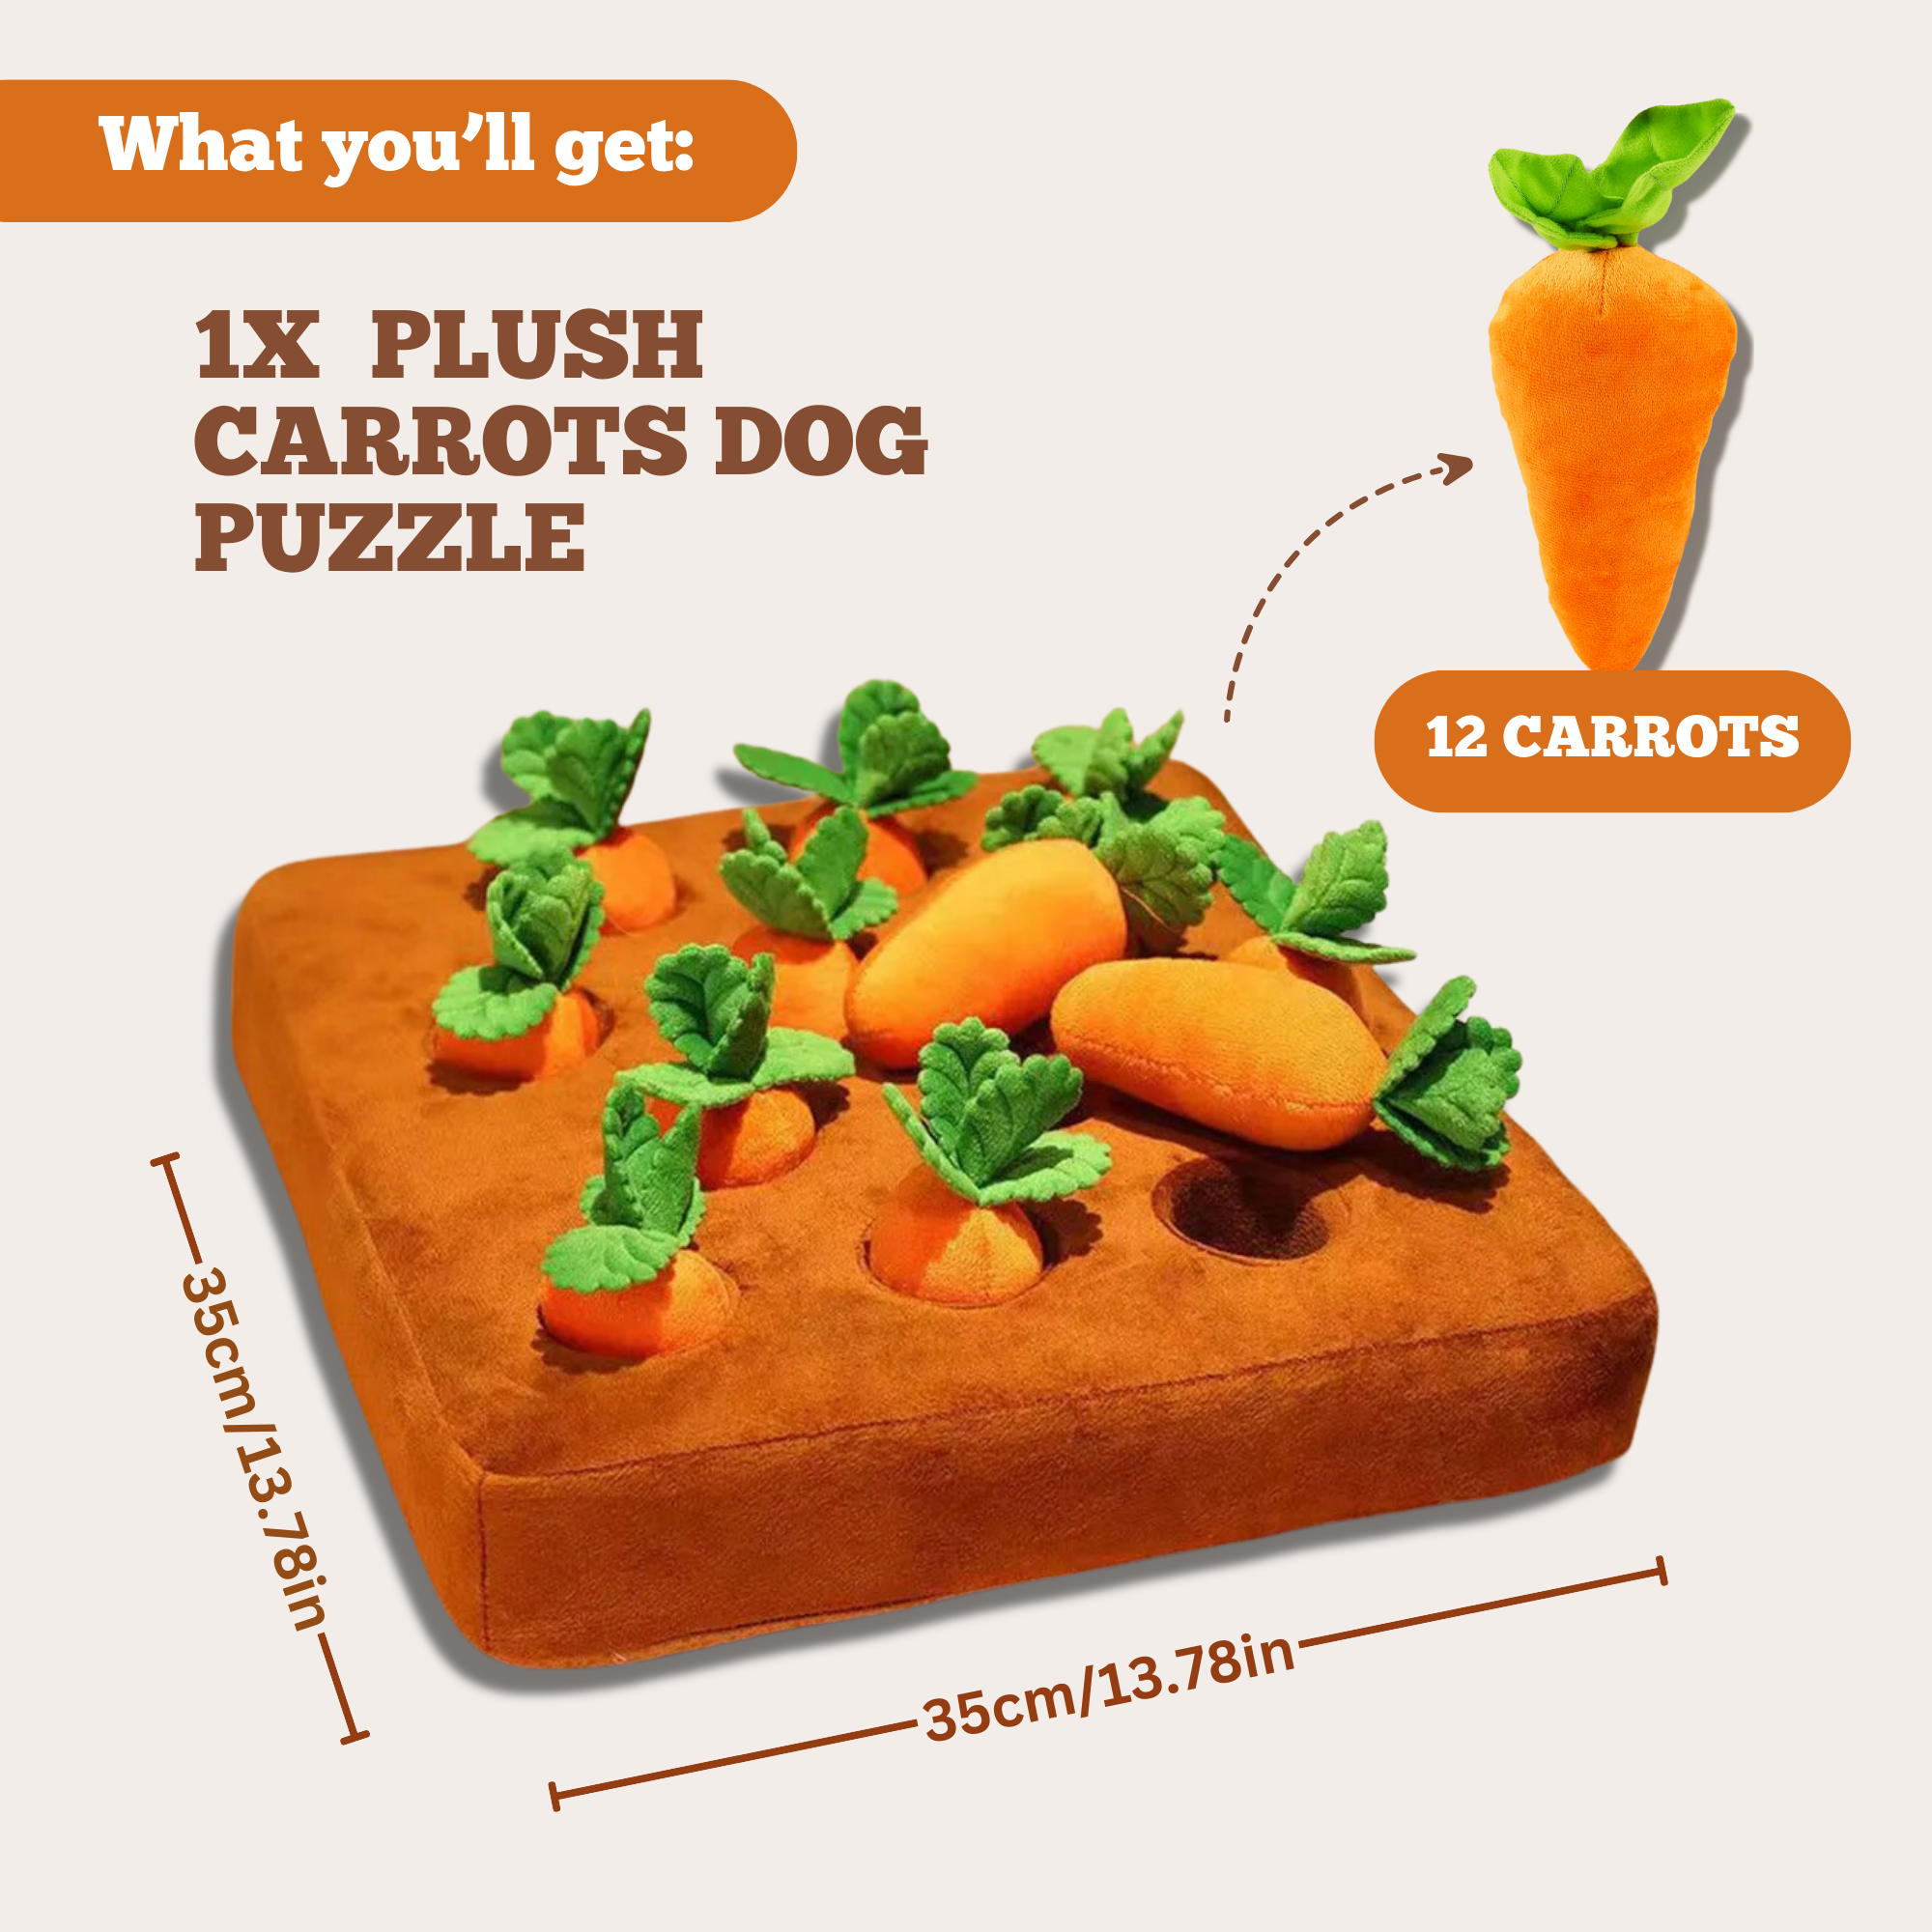 50% THIS WEEK ONLY | Turfy™ Plush Carrots Dog Puzzle